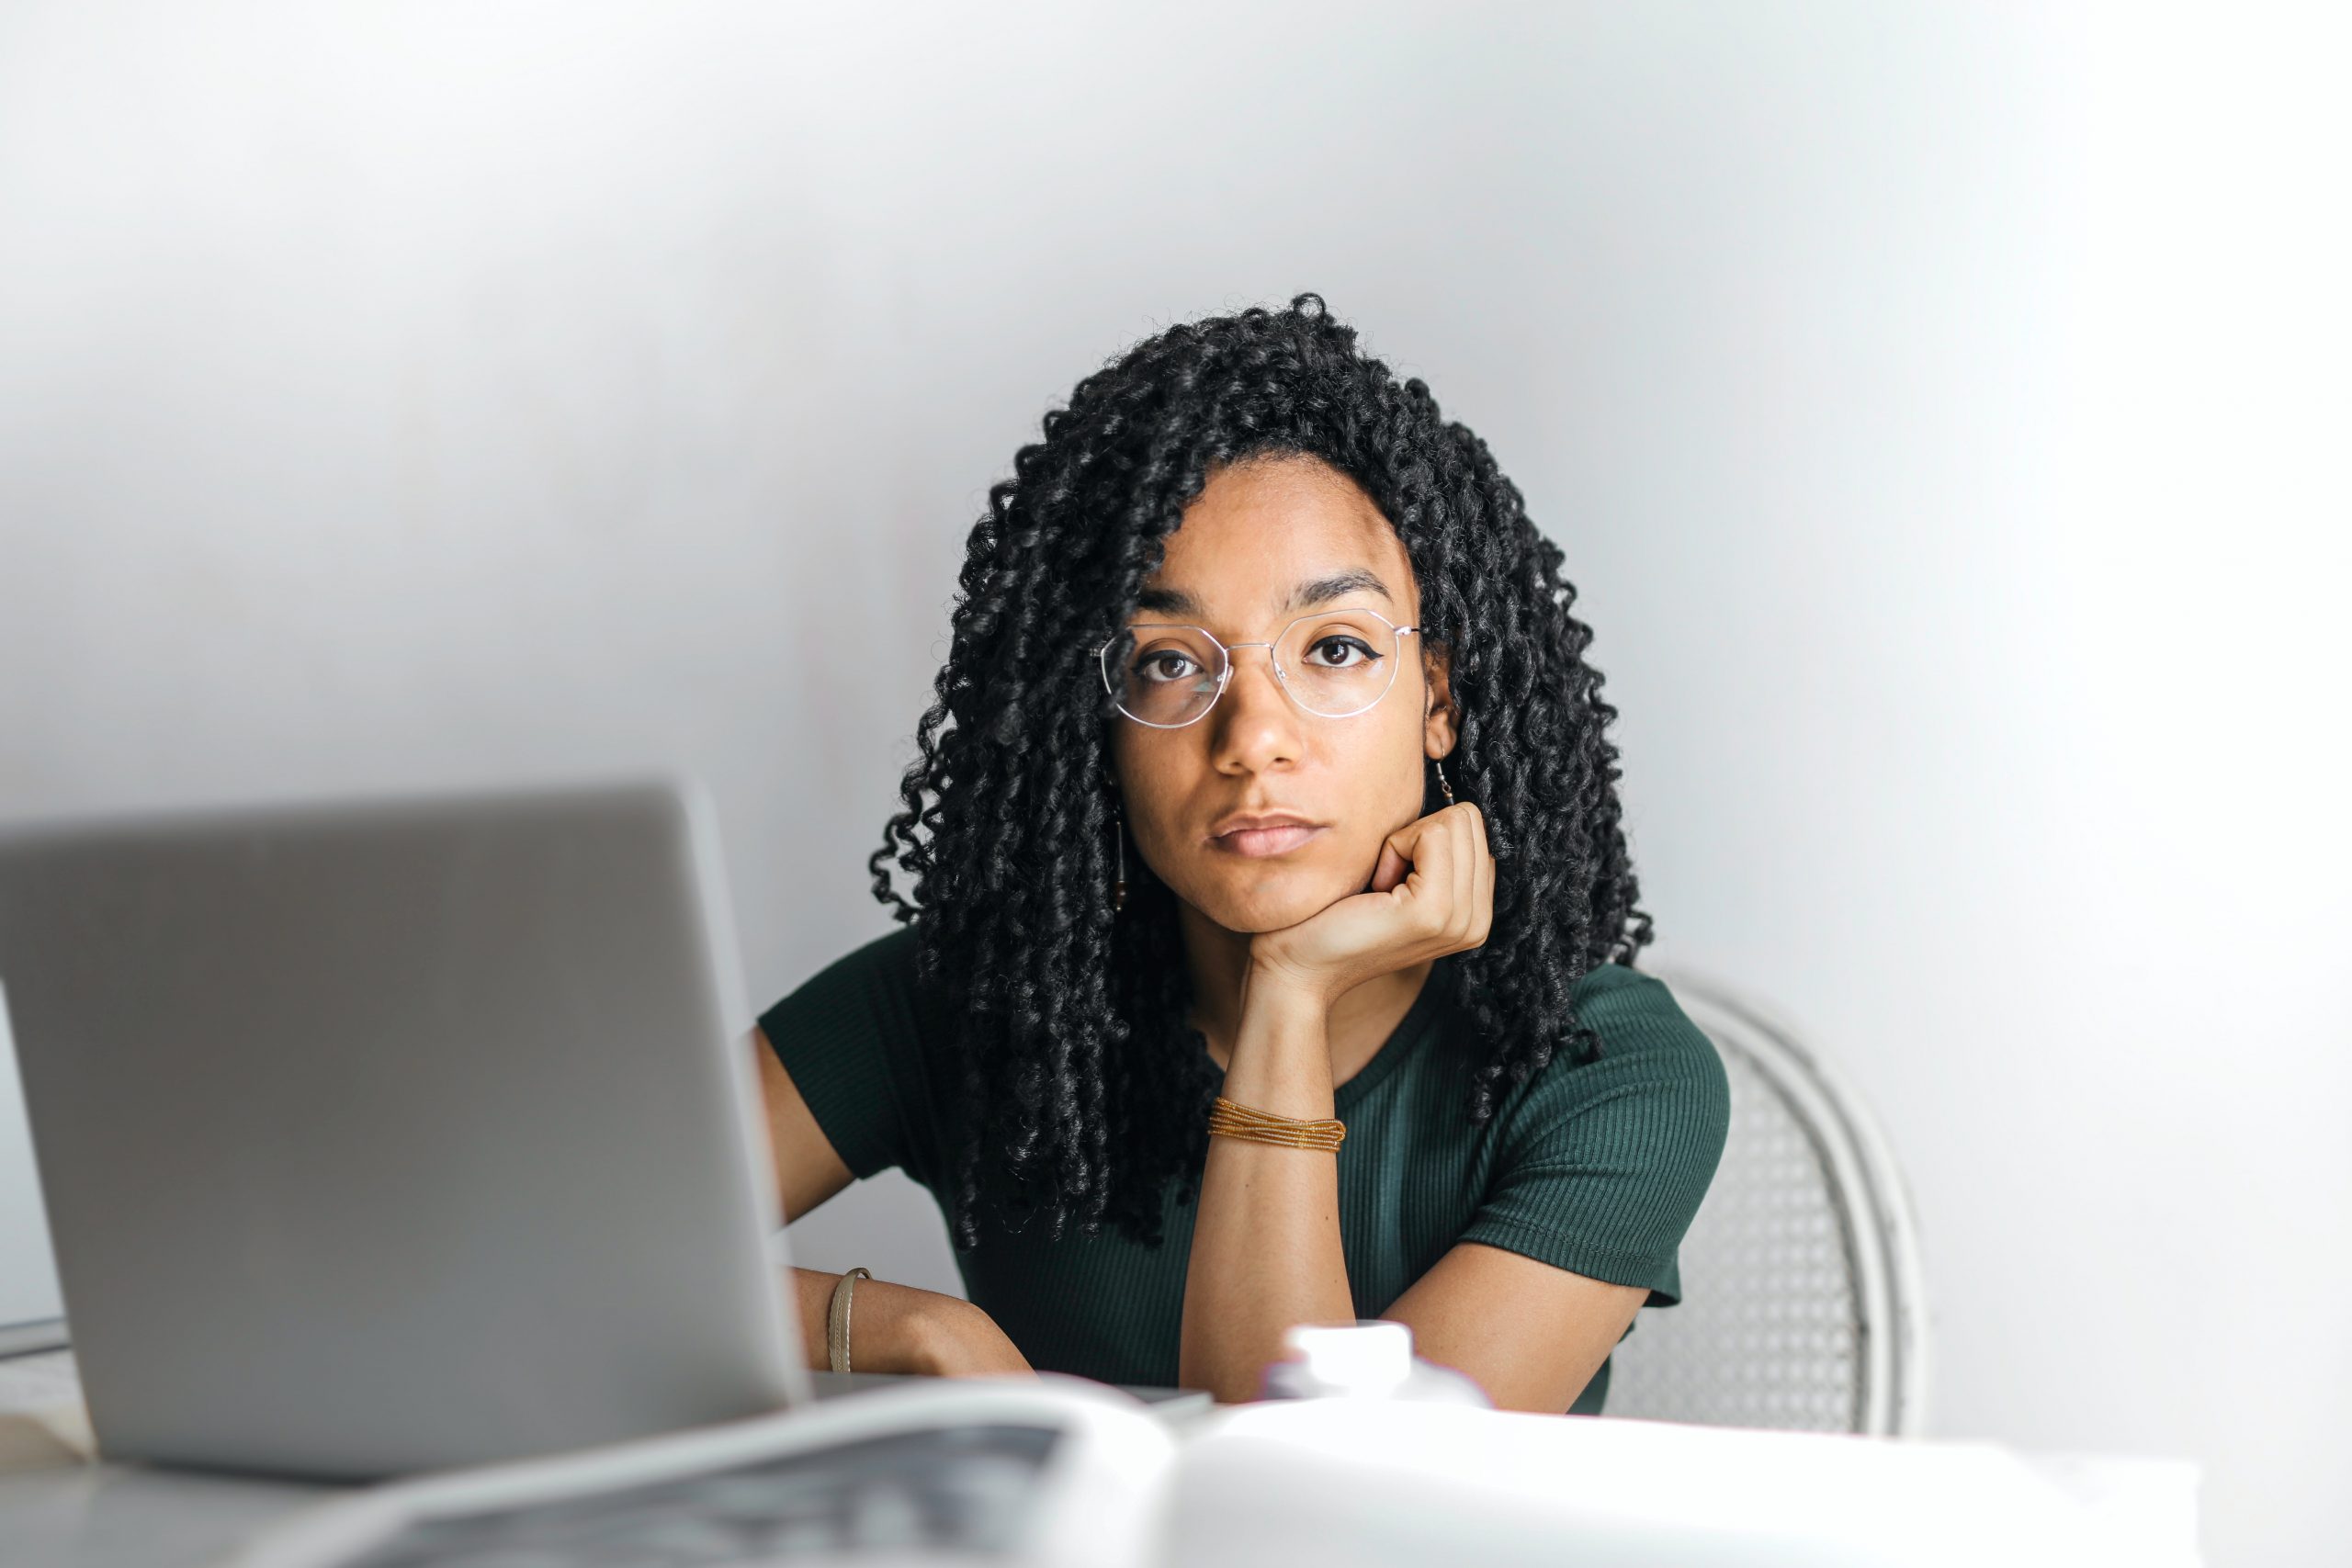 A young Black woman rests her chin on her palm and looks directly into the camera while a laptop sits open on the desk.